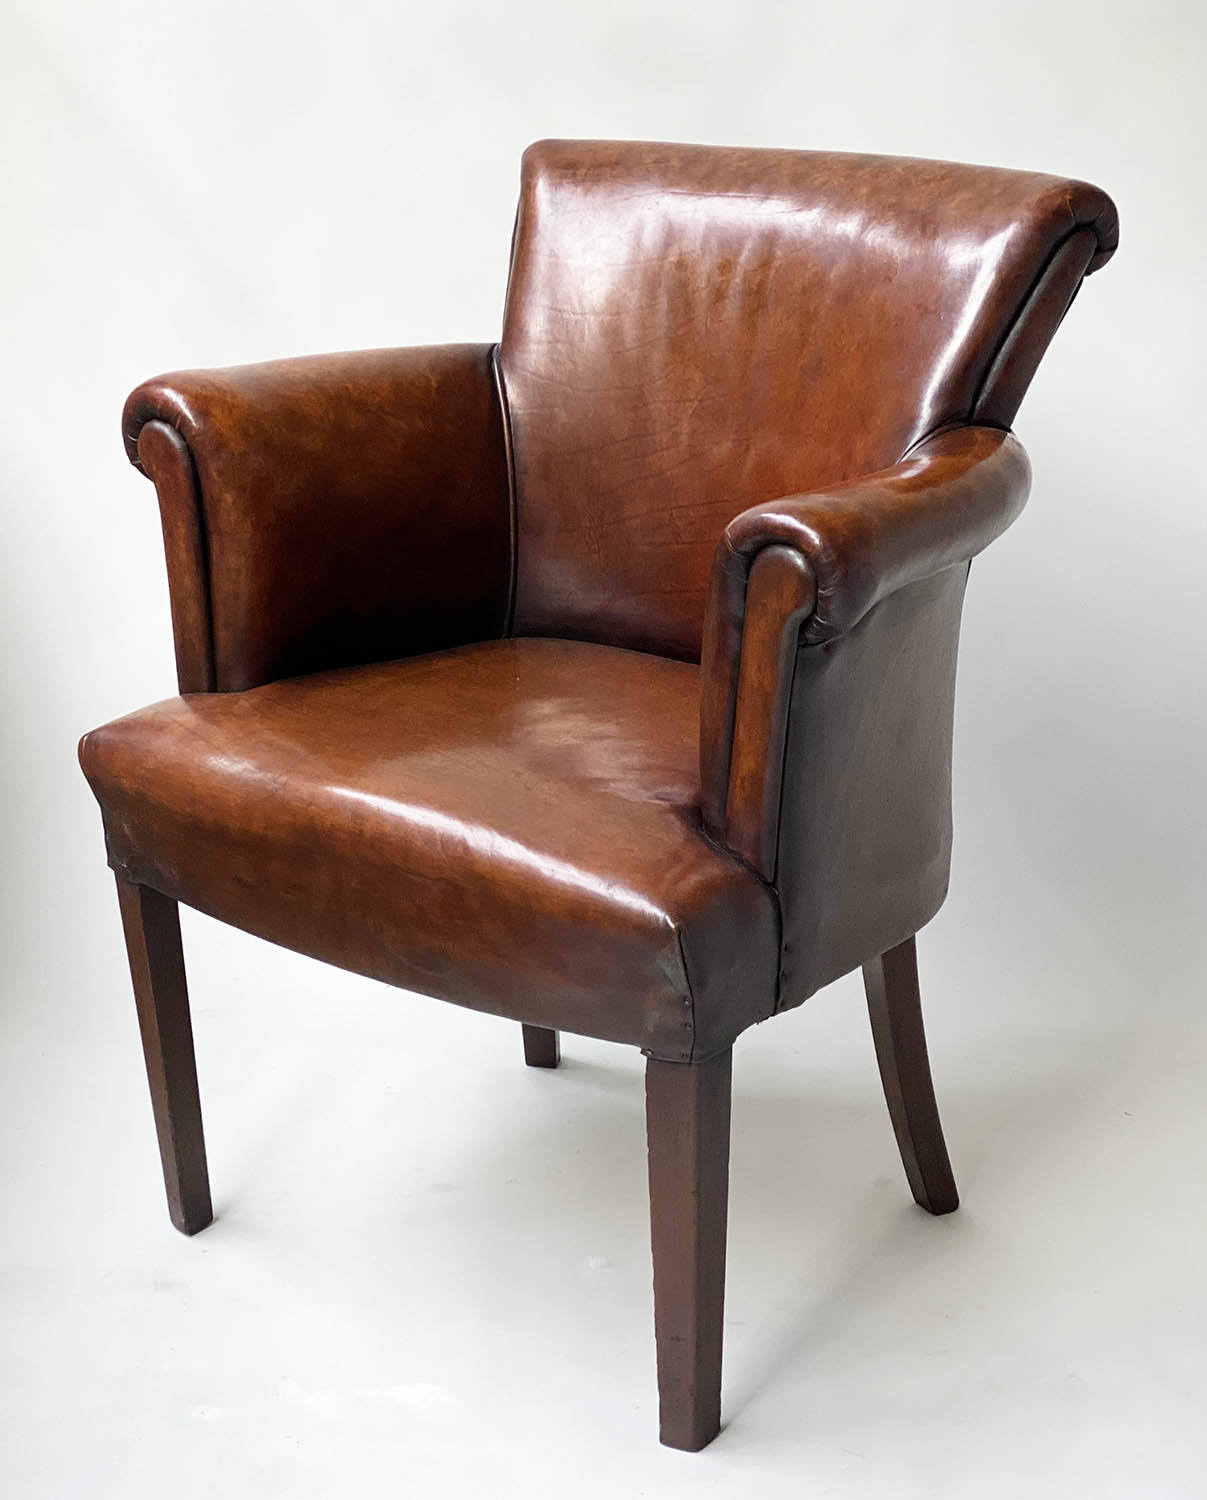 TUB ARMCHAIRS, a pair, vintage hand dyed tobacco brown leather, with arched rounded backs and - Image 5 of 7